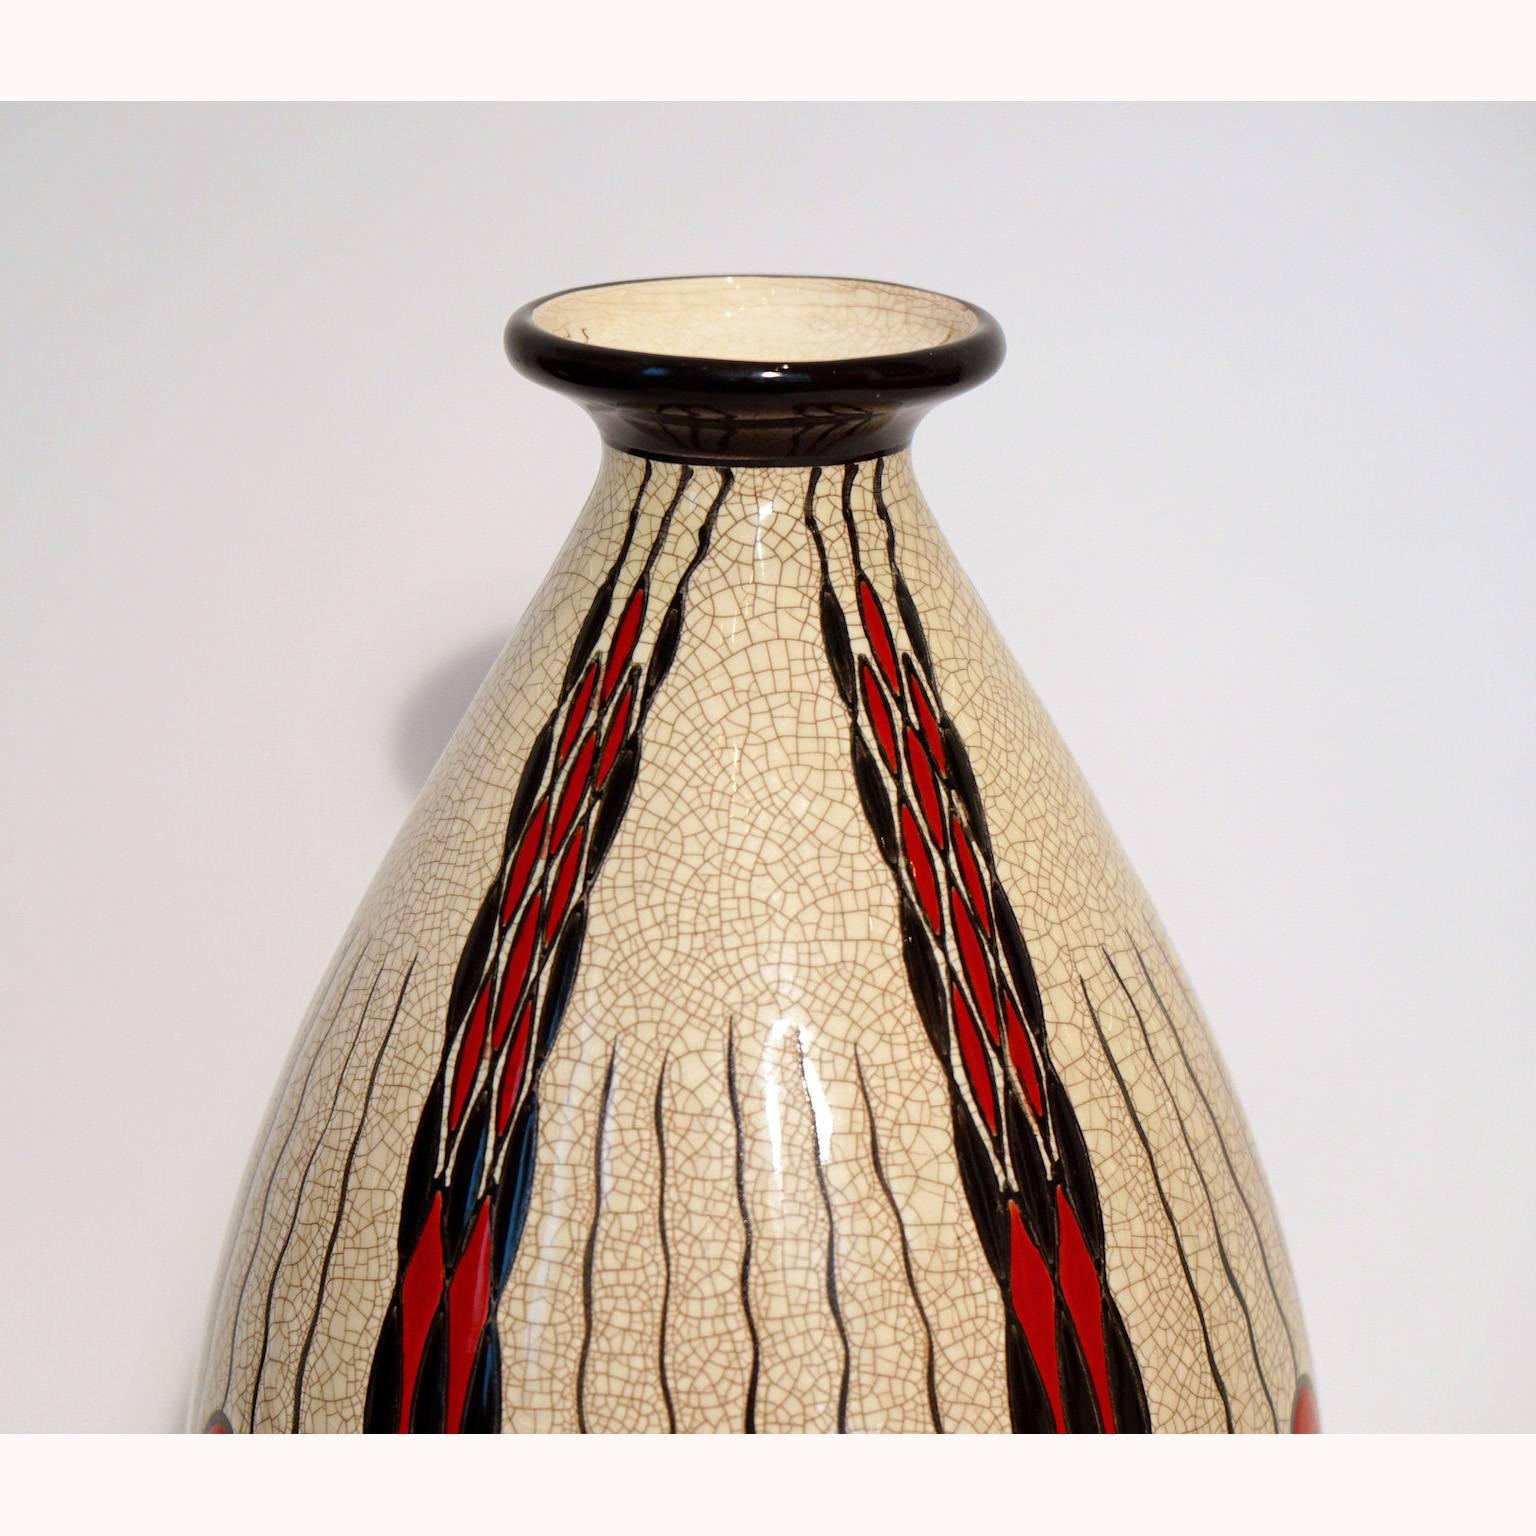 Earthenware vase by Charles Catteau. Polychrome design with geometric patterns. See page 238 